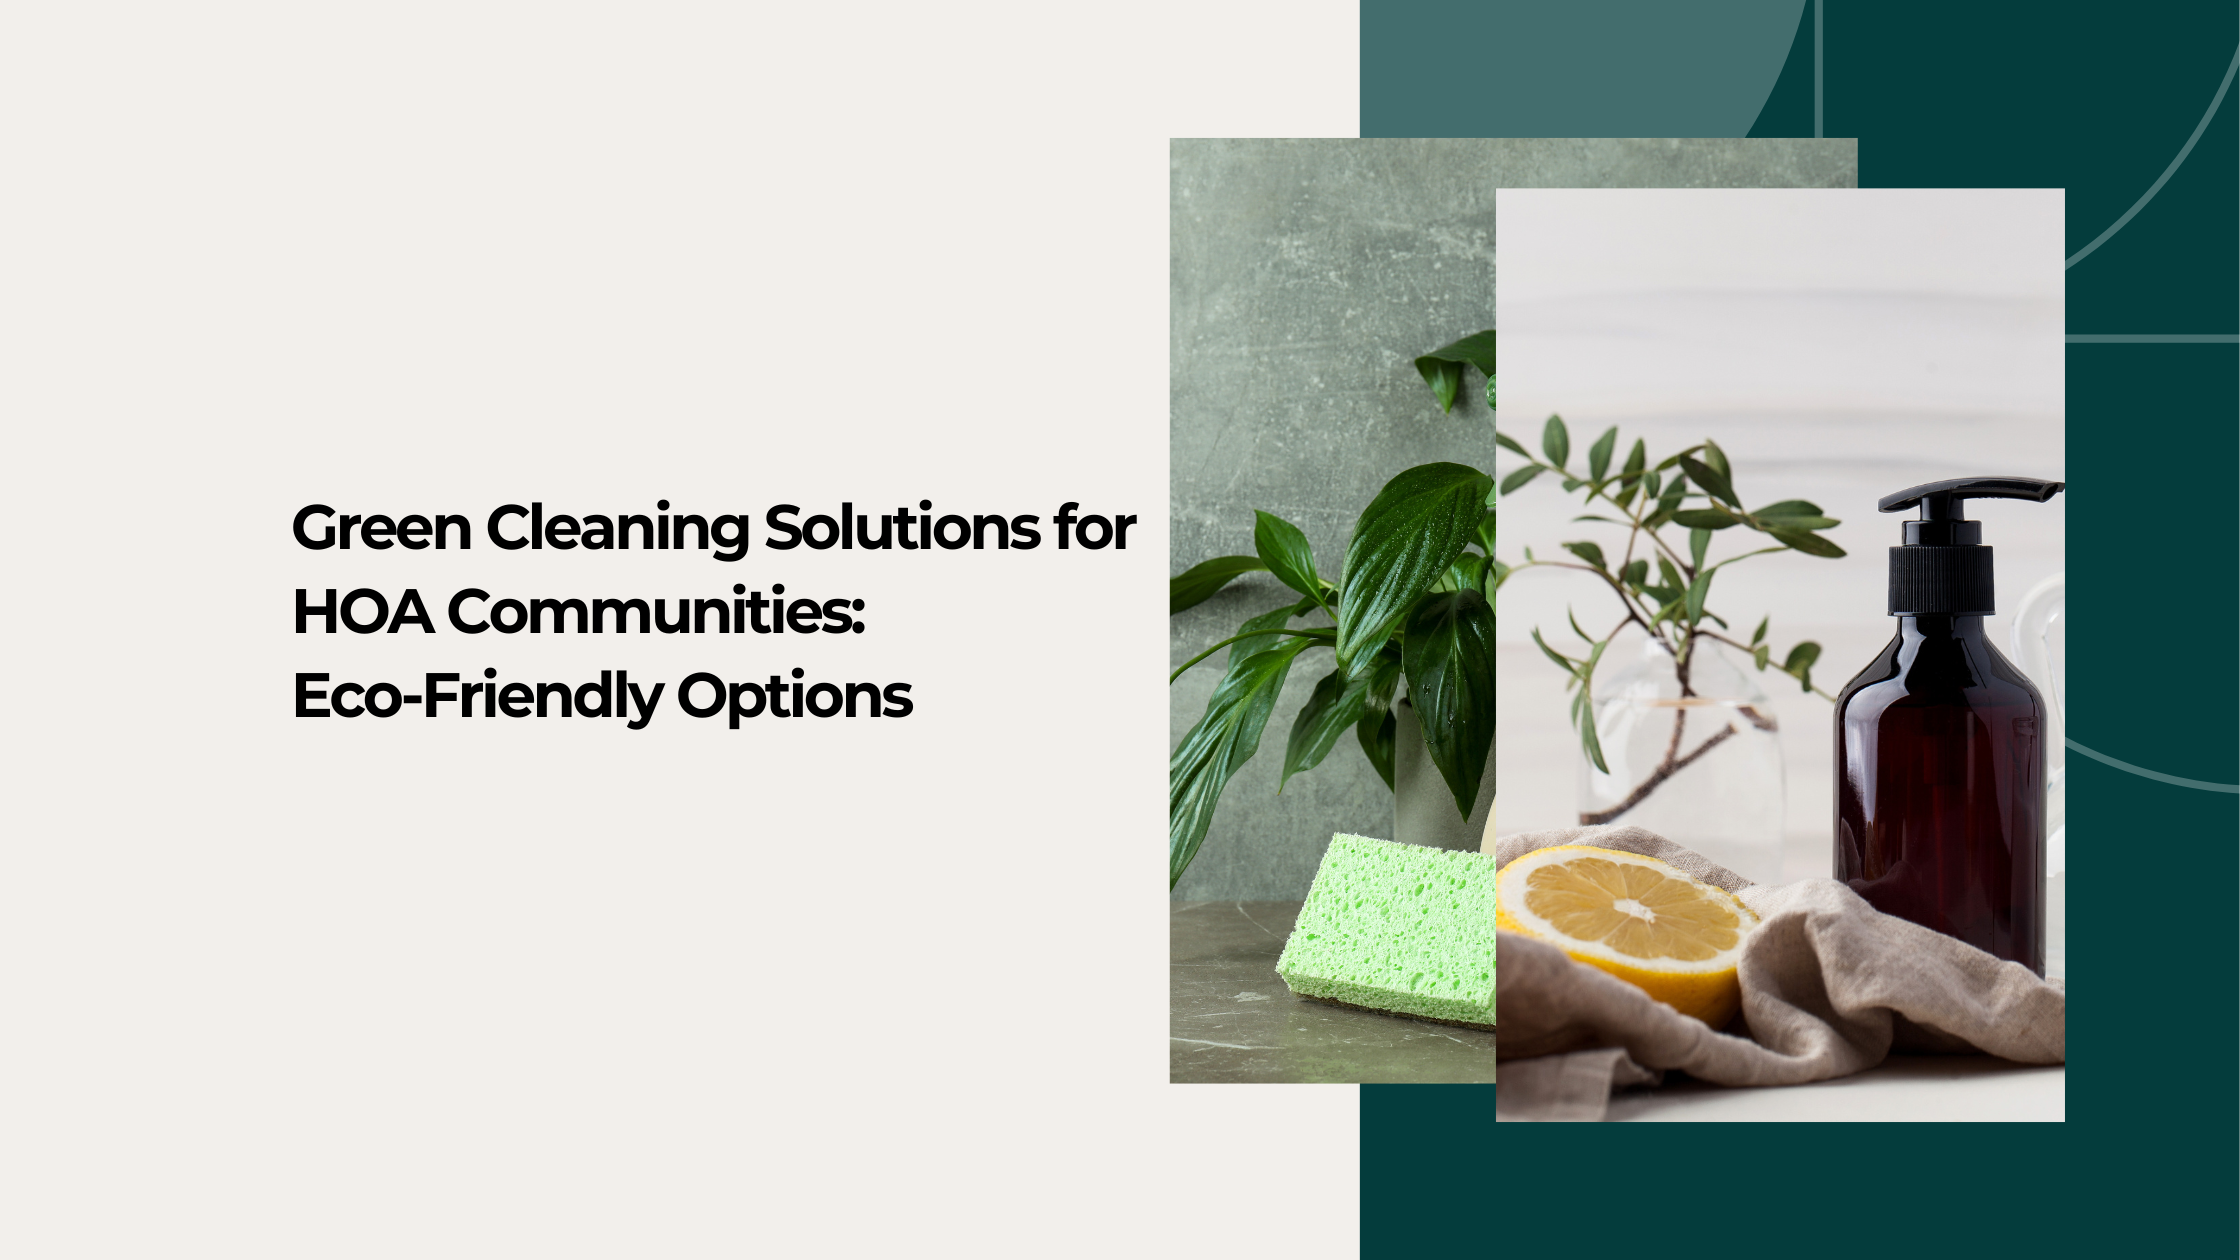 Green Cleaning Solutions for HOA Communities: Eco-Friendly Options